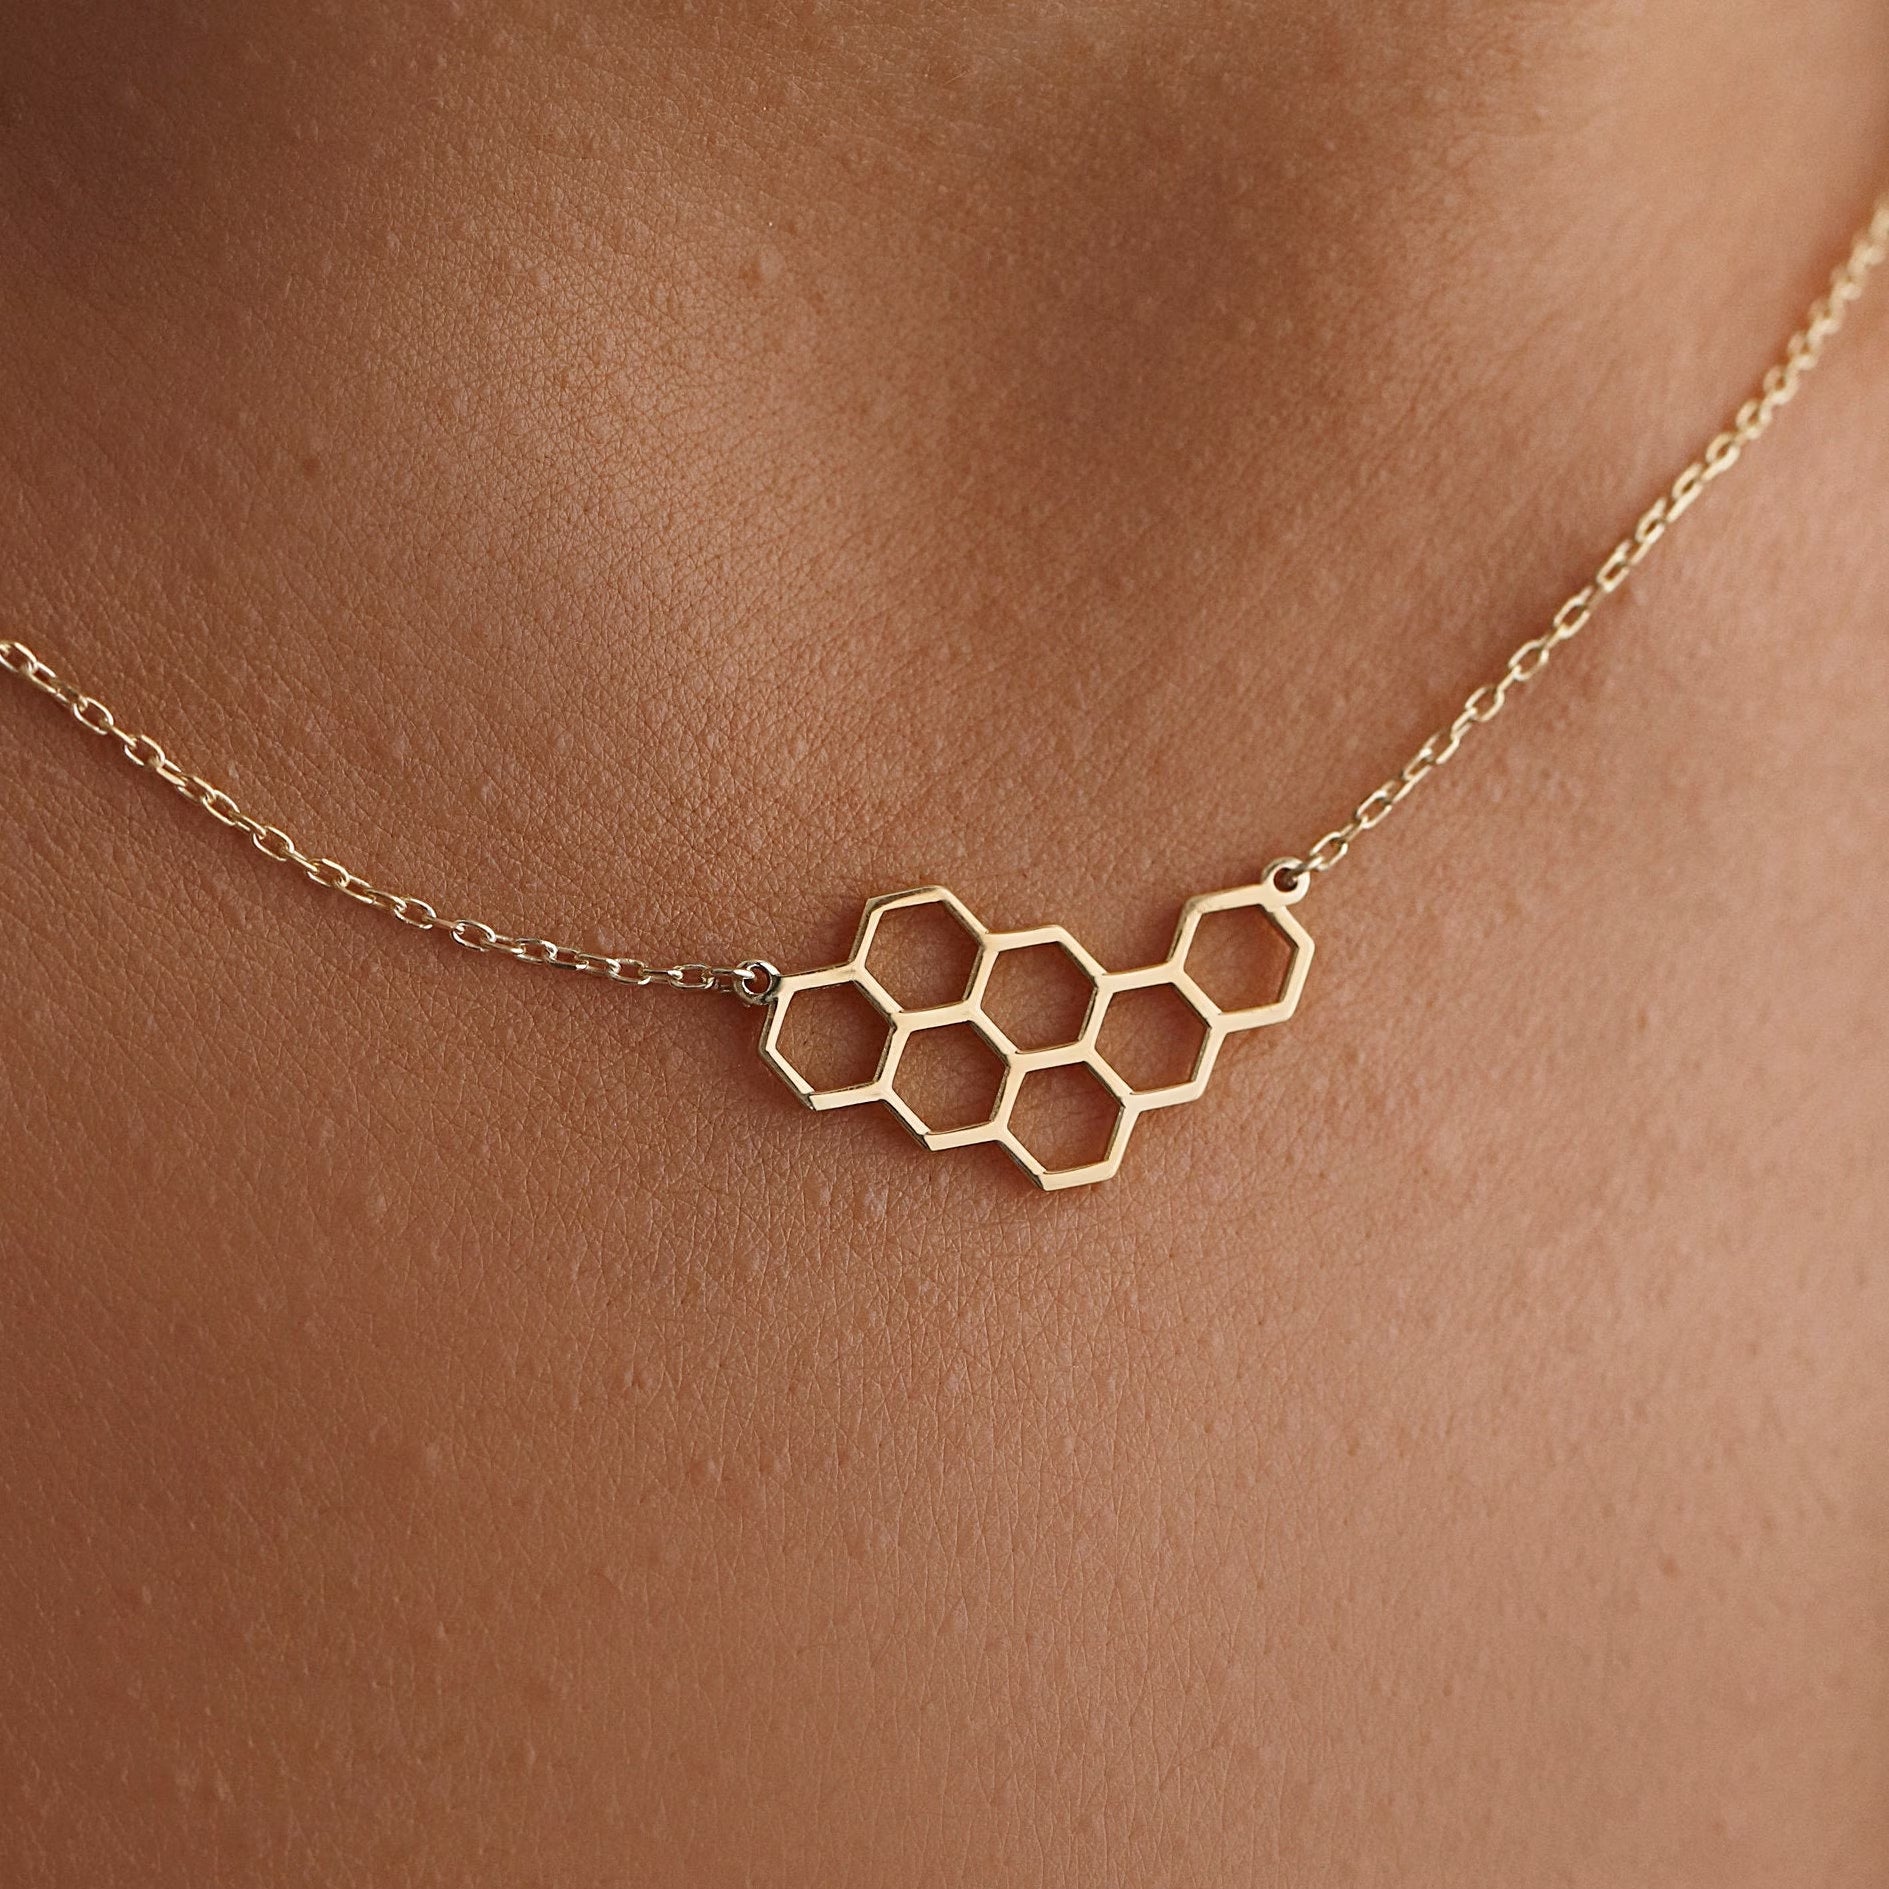 Honeycomb Necklace, Geometry Shape, Layering Necklace, Birthday Necklace, Gift for Her, Christmas Gift,